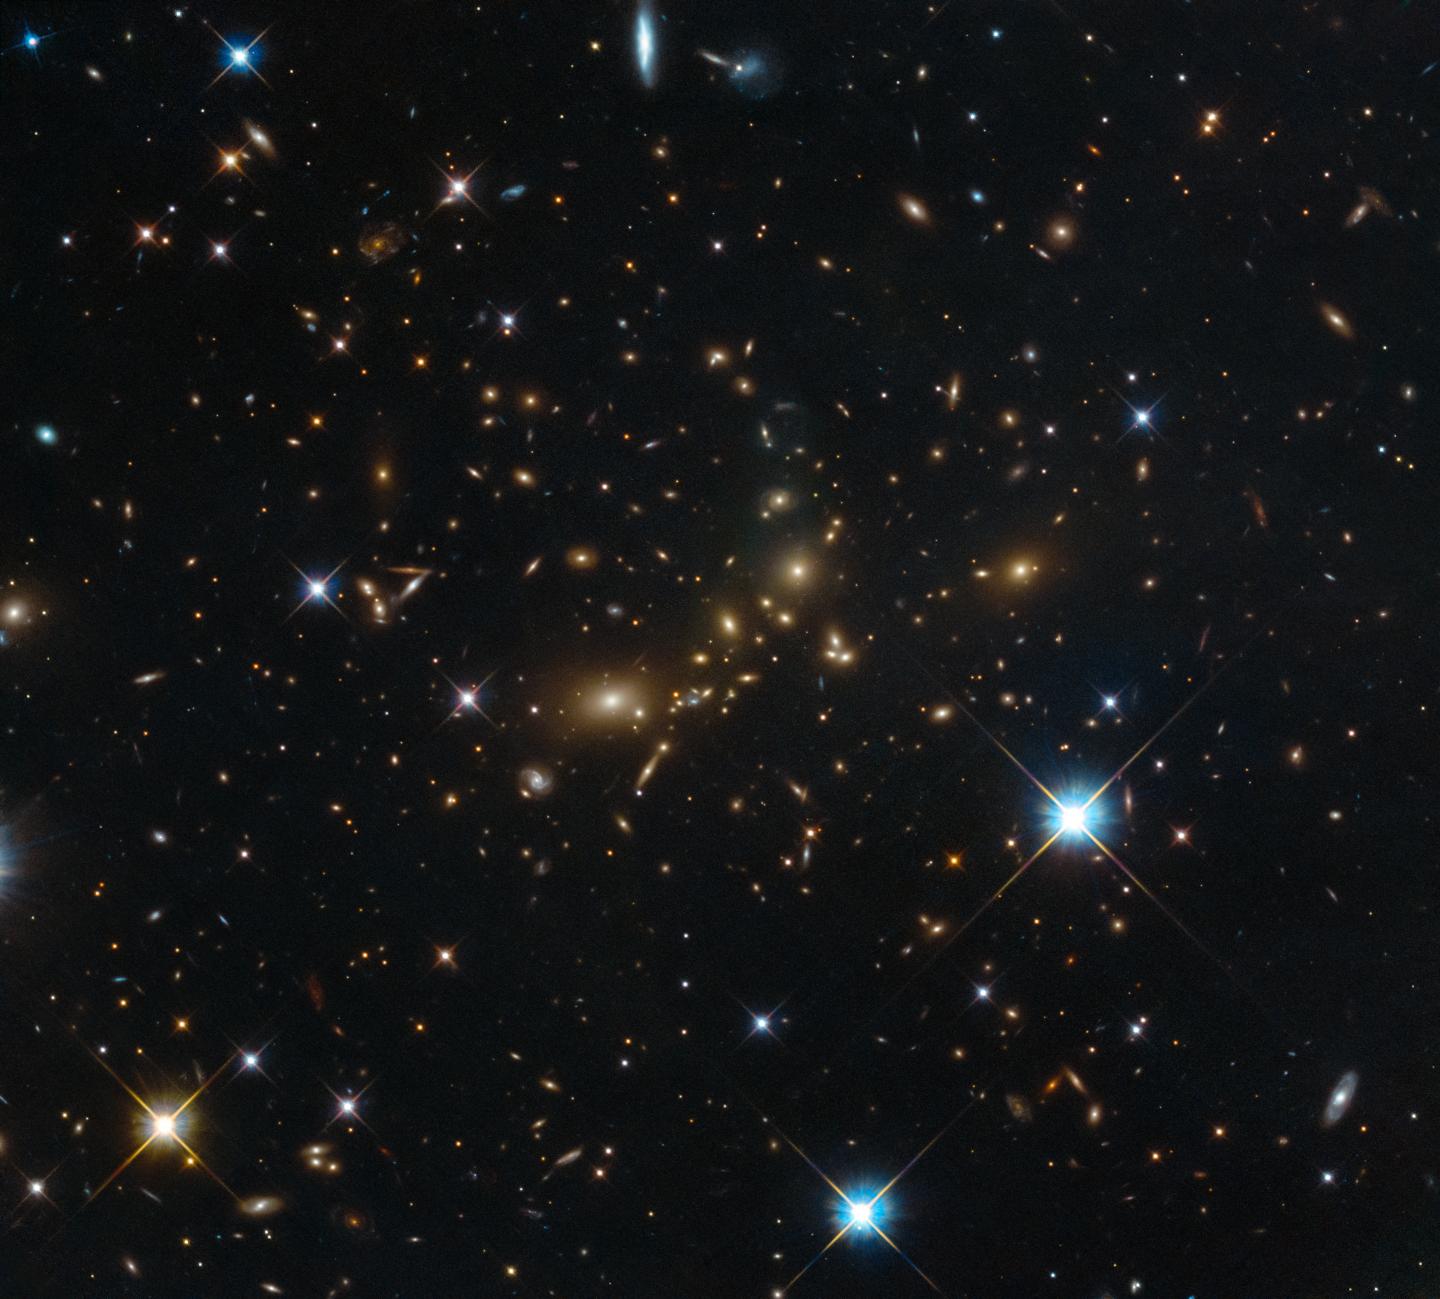 Hubble View of Massive Galaxy Cluster